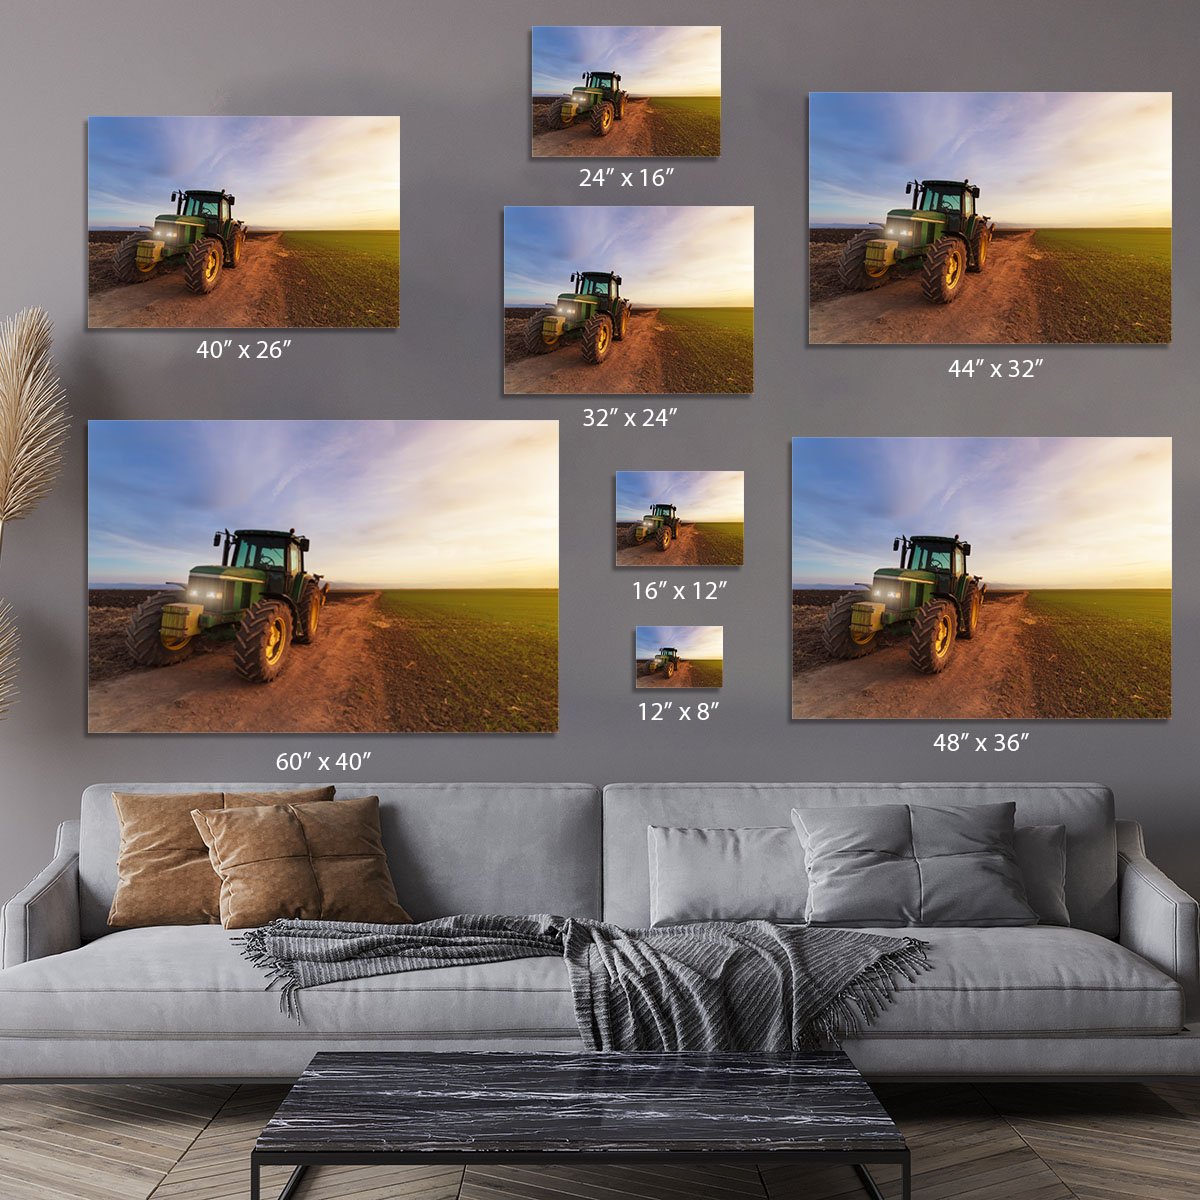 Green tractor Canvas Print or Poster